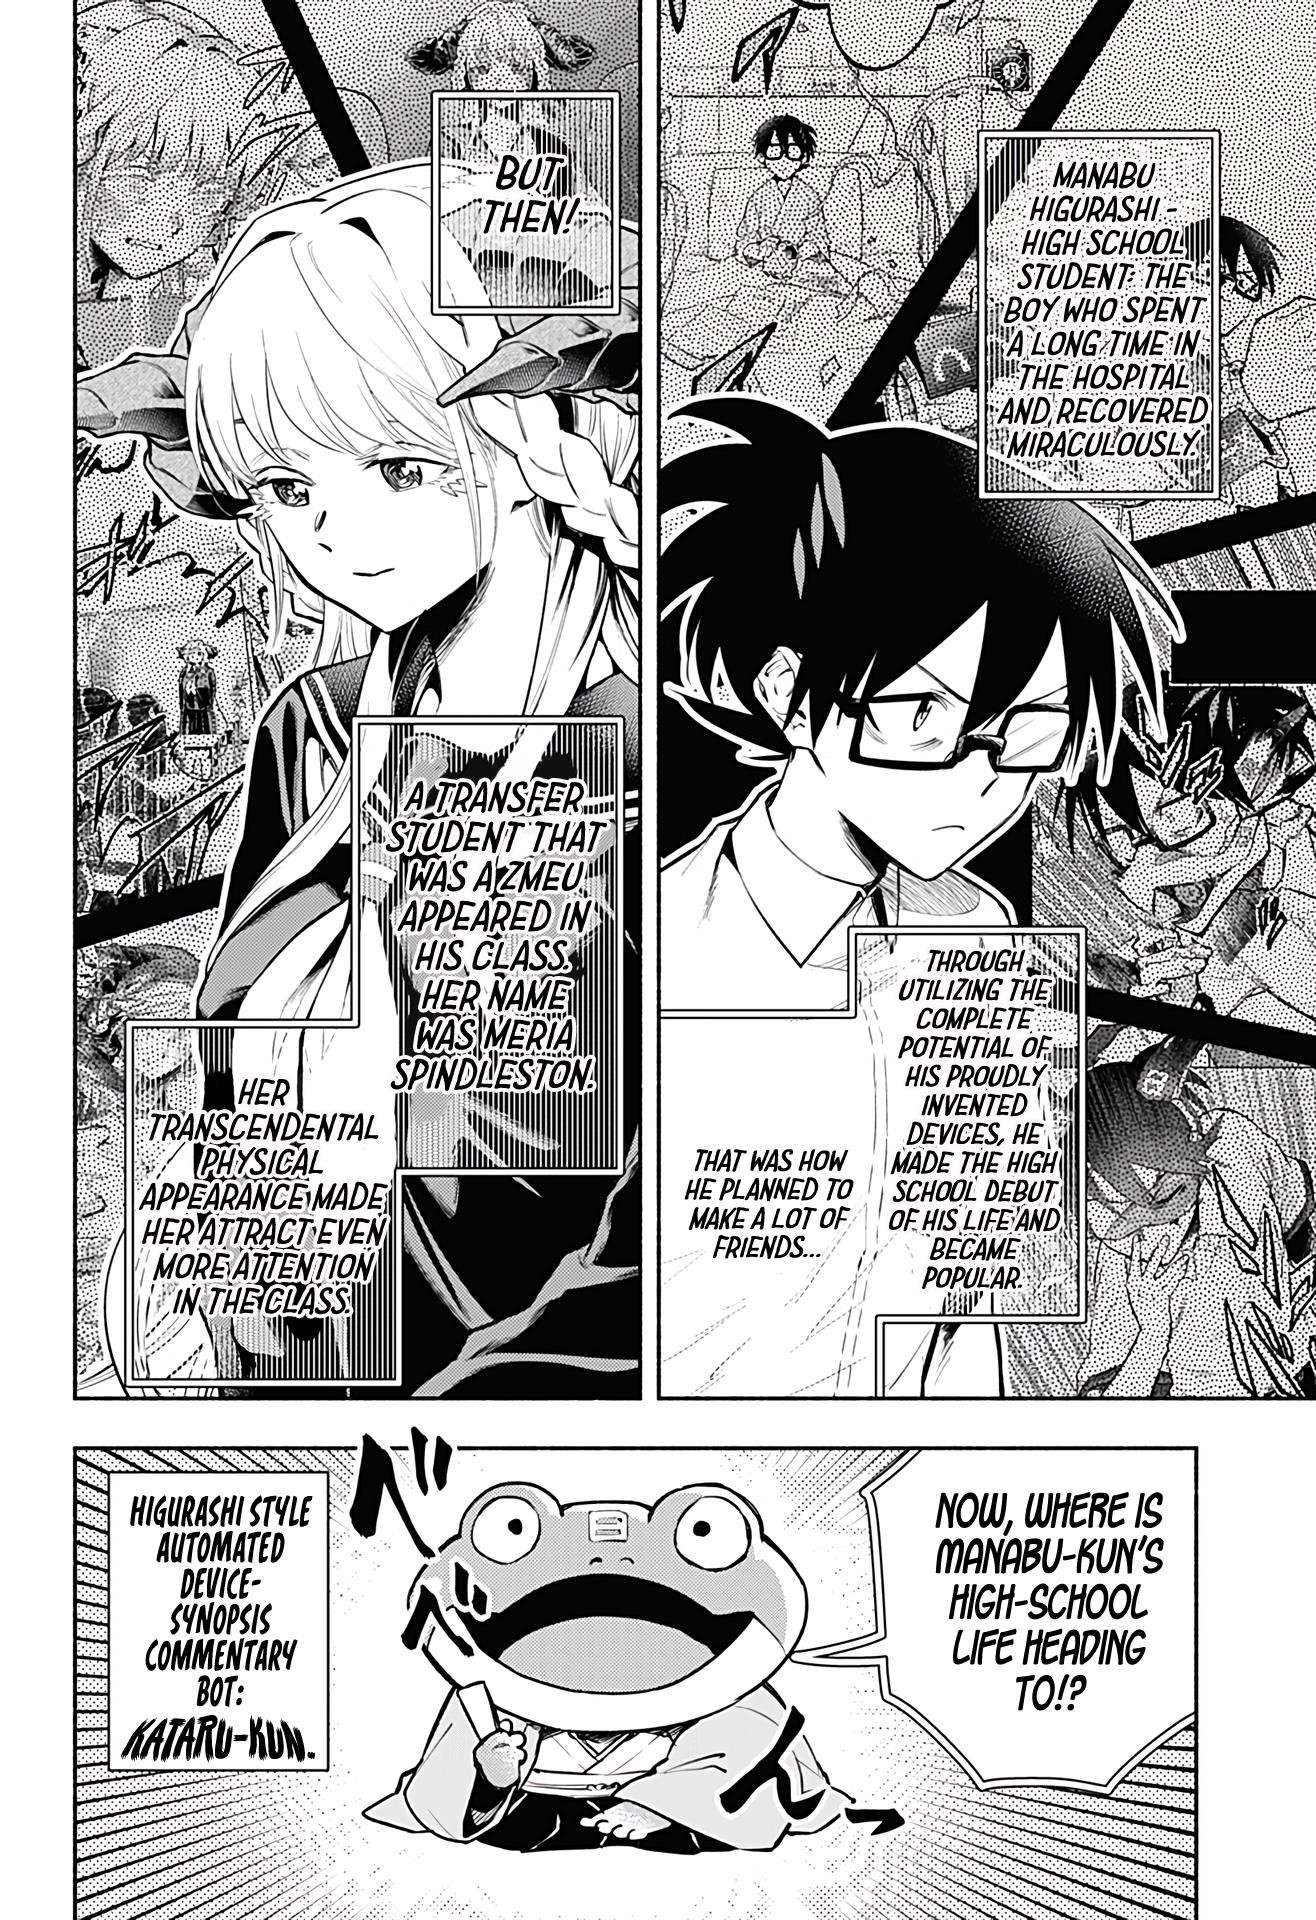 That Dragon (Exchange) Student Stands Out More Than Me Chapter 2 - Page 2